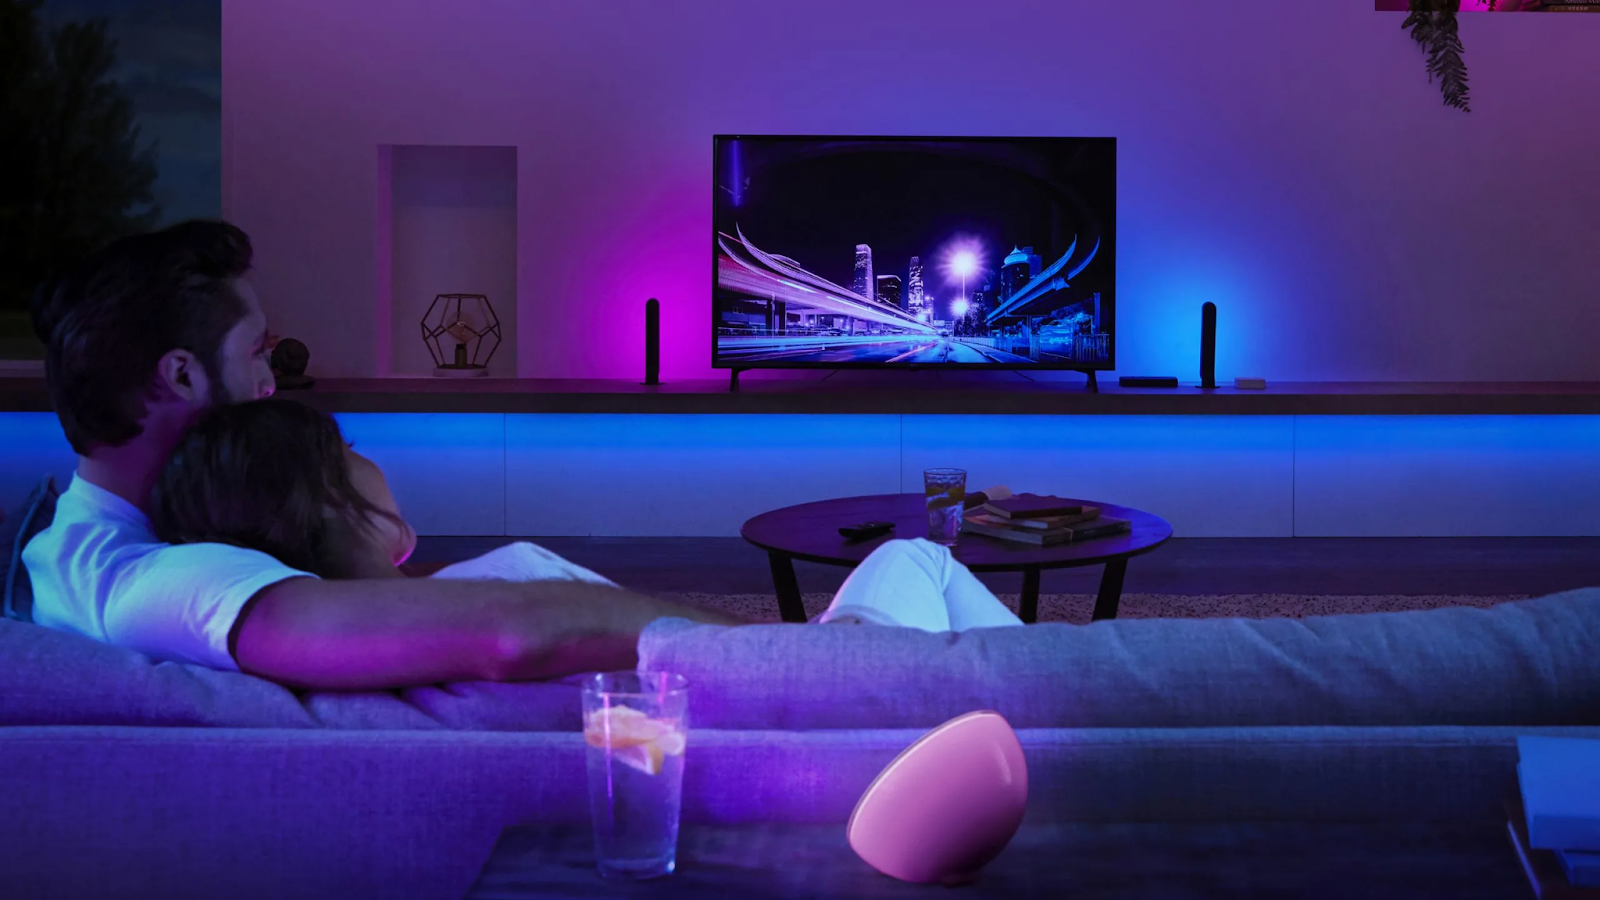 Phillips hue lamps and lightstrips neon ambience with nighttime cityscape display in home theatre